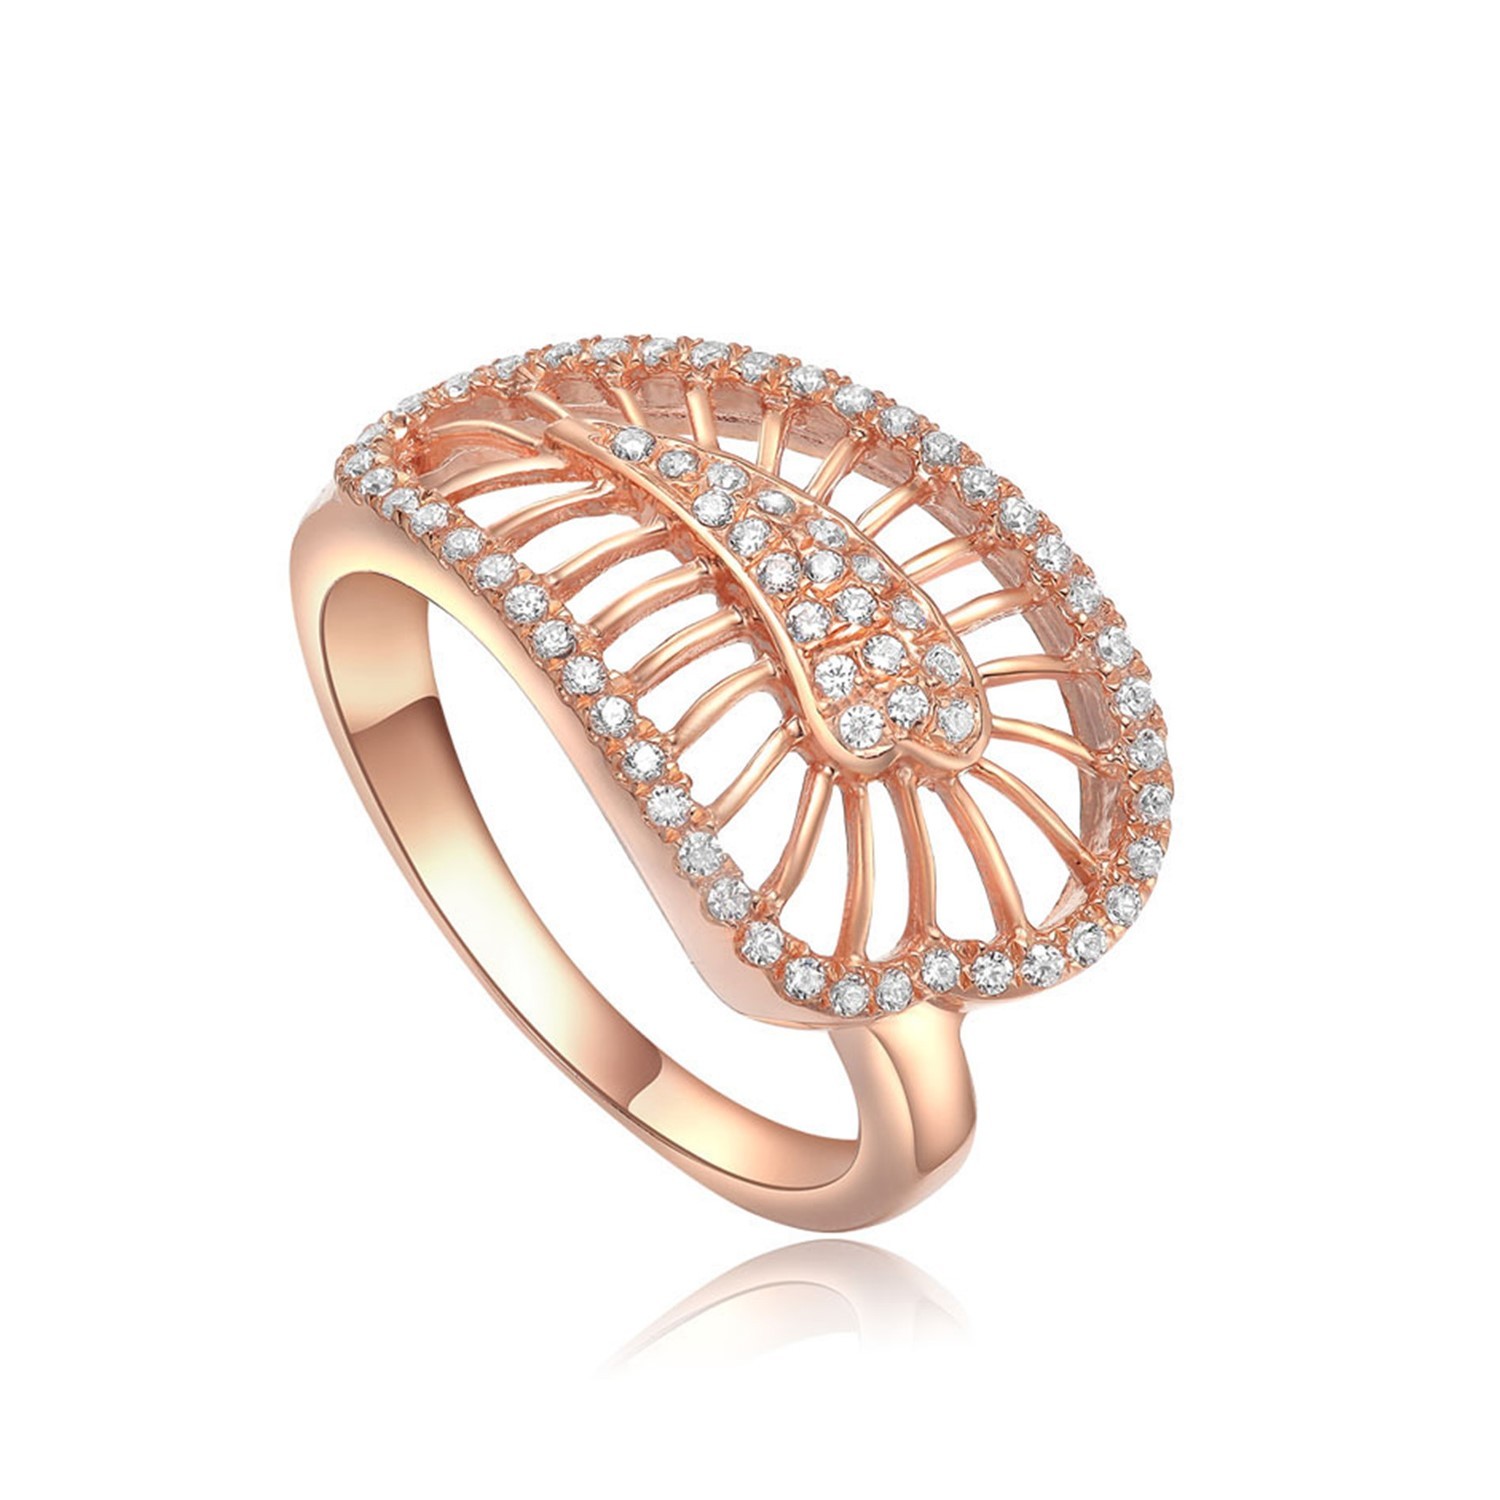 High quality design ring rose gold plated cubic zirconia women jewellery 925 sterling silver ring